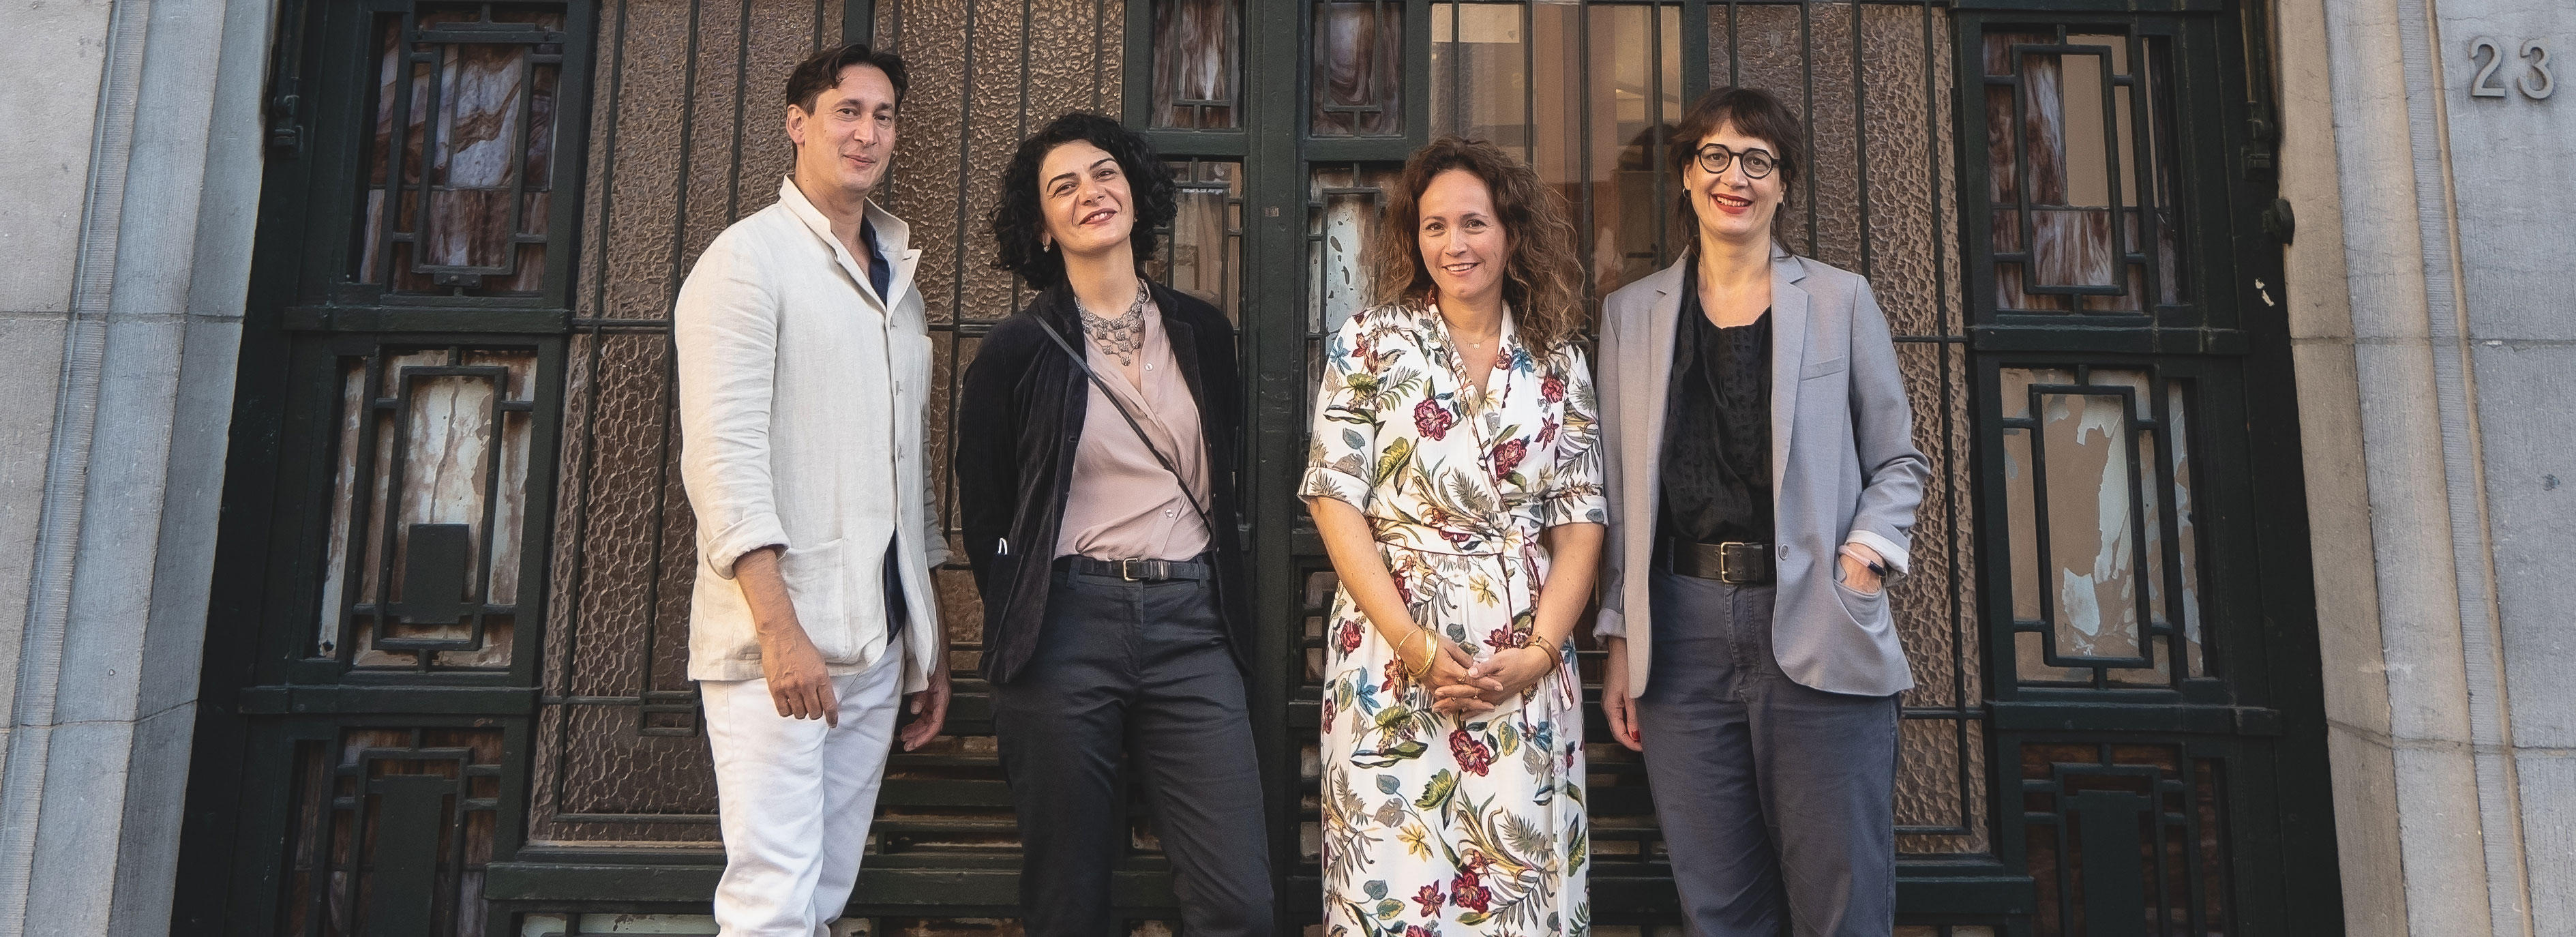 AGBU Europe partners with Bozar for the Belgian Premiere of “Should the Wind Drop” by Nora Martirosyan